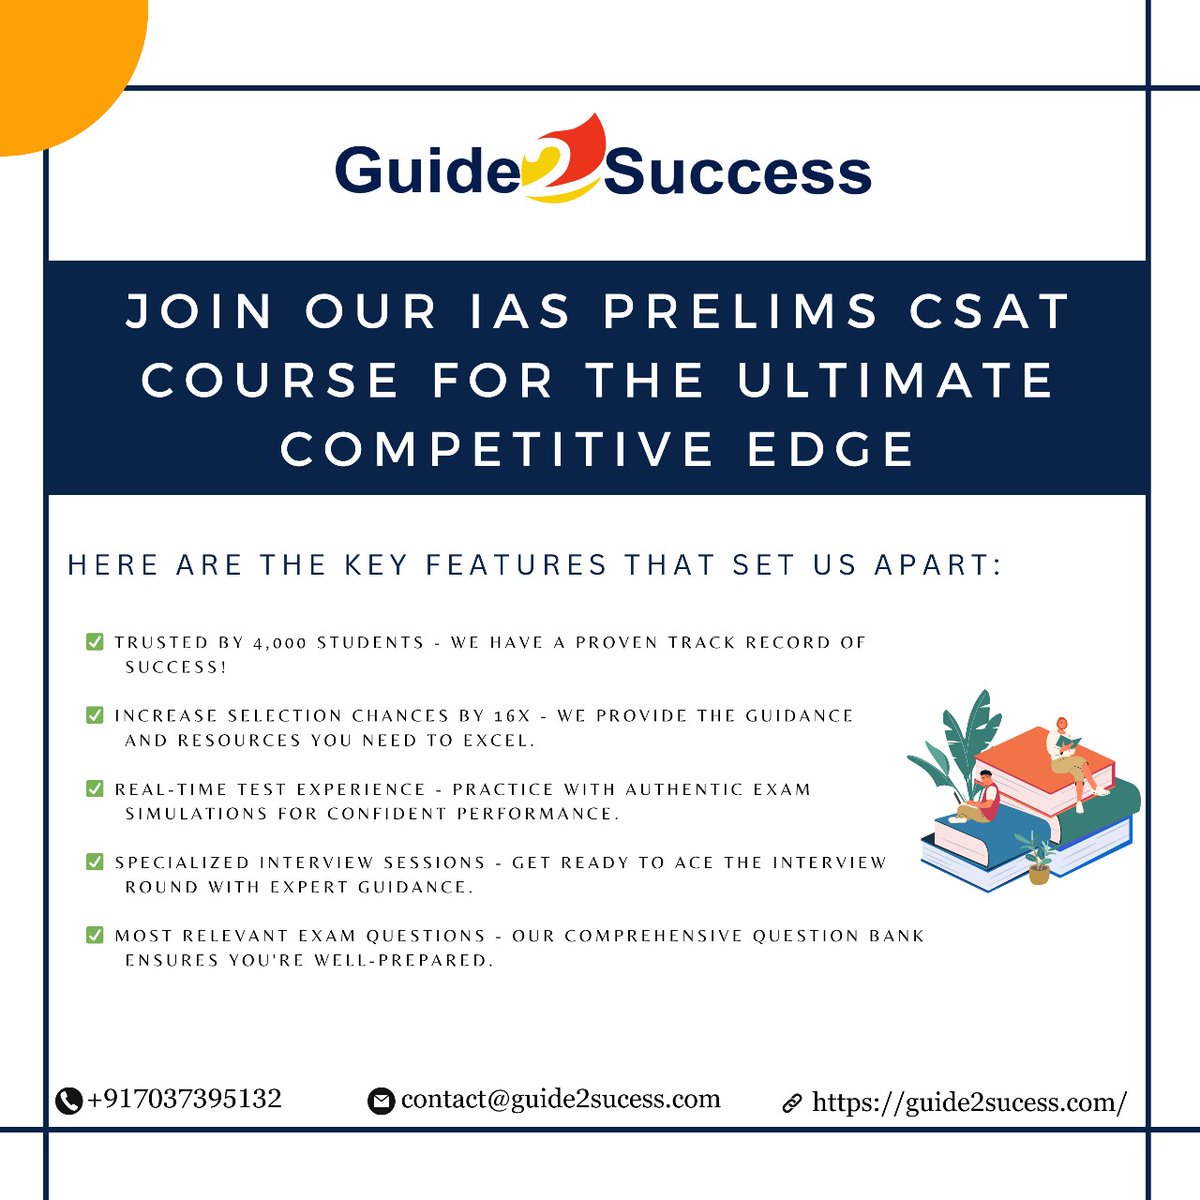 📚 Join our IAS Prelims CSAT Course for the ultimate competitive edge! Here are the key features that set us apart:
Don't miss this opportunity to supercharge your IAS Prelims CSAT preparation! 🚀.
 Contact us : contact@guide2sucess.com
 #IASPrelims #CSAT